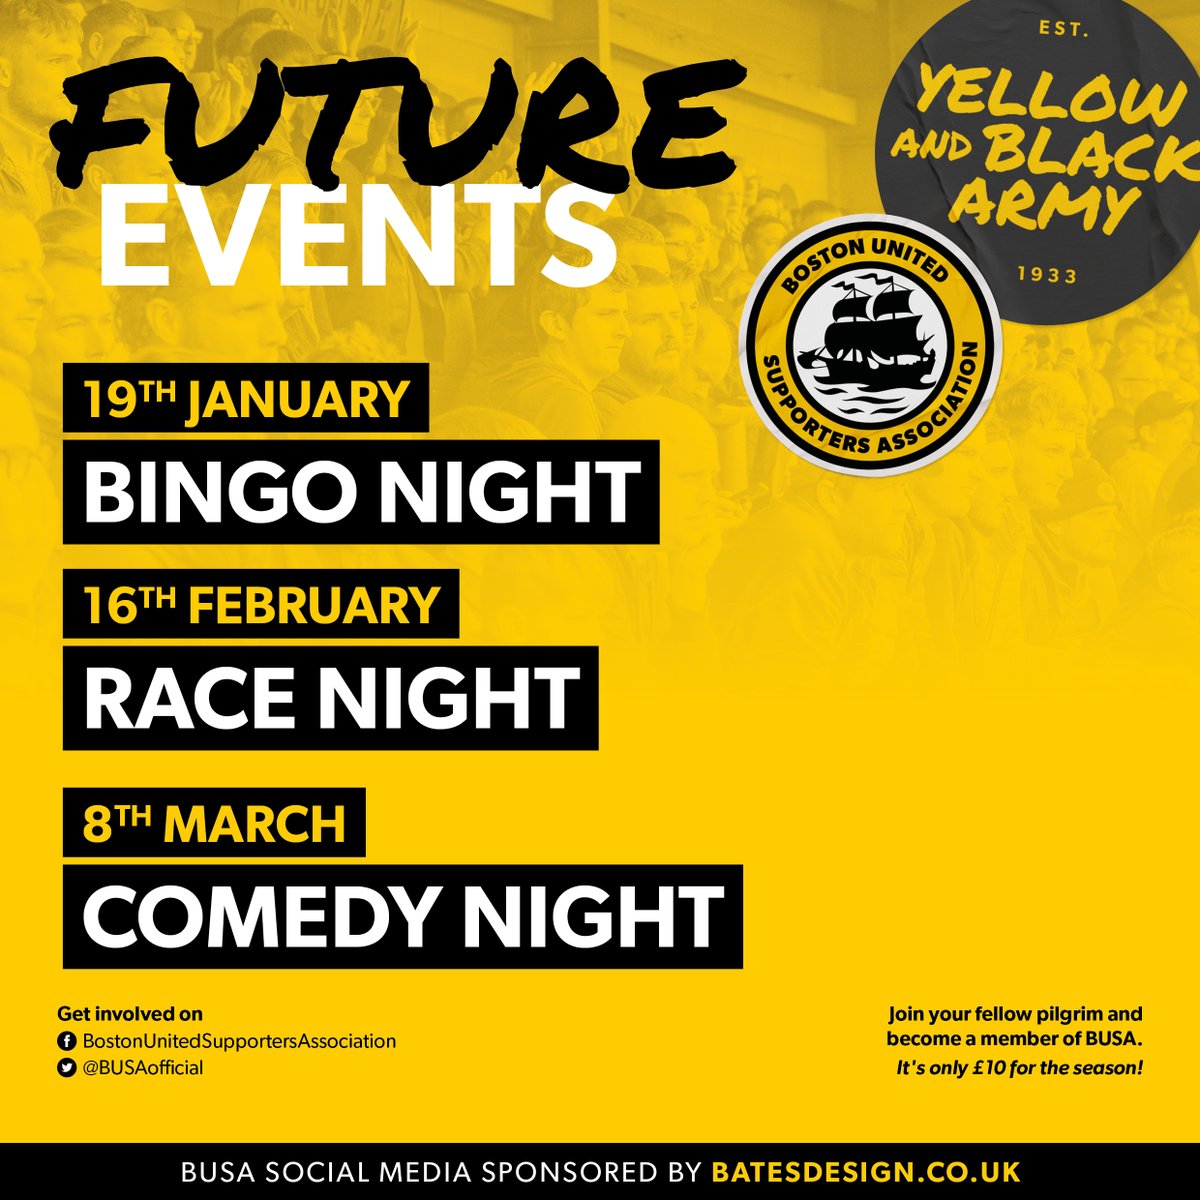 Whilst you're all hopefully on the way to Scunny, we just wanted to let you know we have Bingo Night on Friday 19th January.

🚪 Doors open 6.00pm
👀 Eyes down 6.30pm
🏟️ Jakemans Community Stadium
🆓 Free entry
✅ 50% of the profits going to the Butterfly Hospice Trust